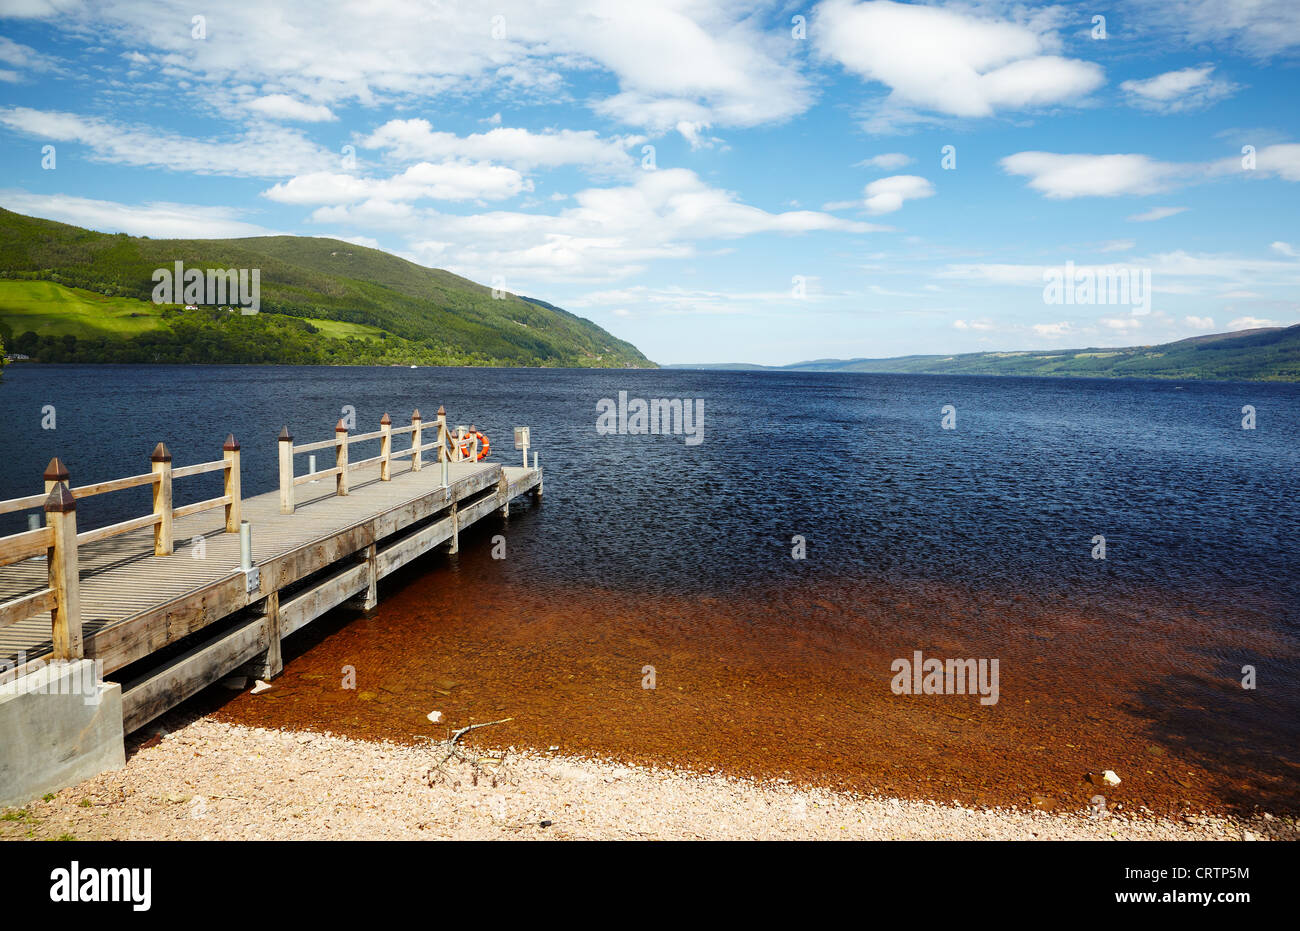 planked footway on Loch Ness Stock Photo